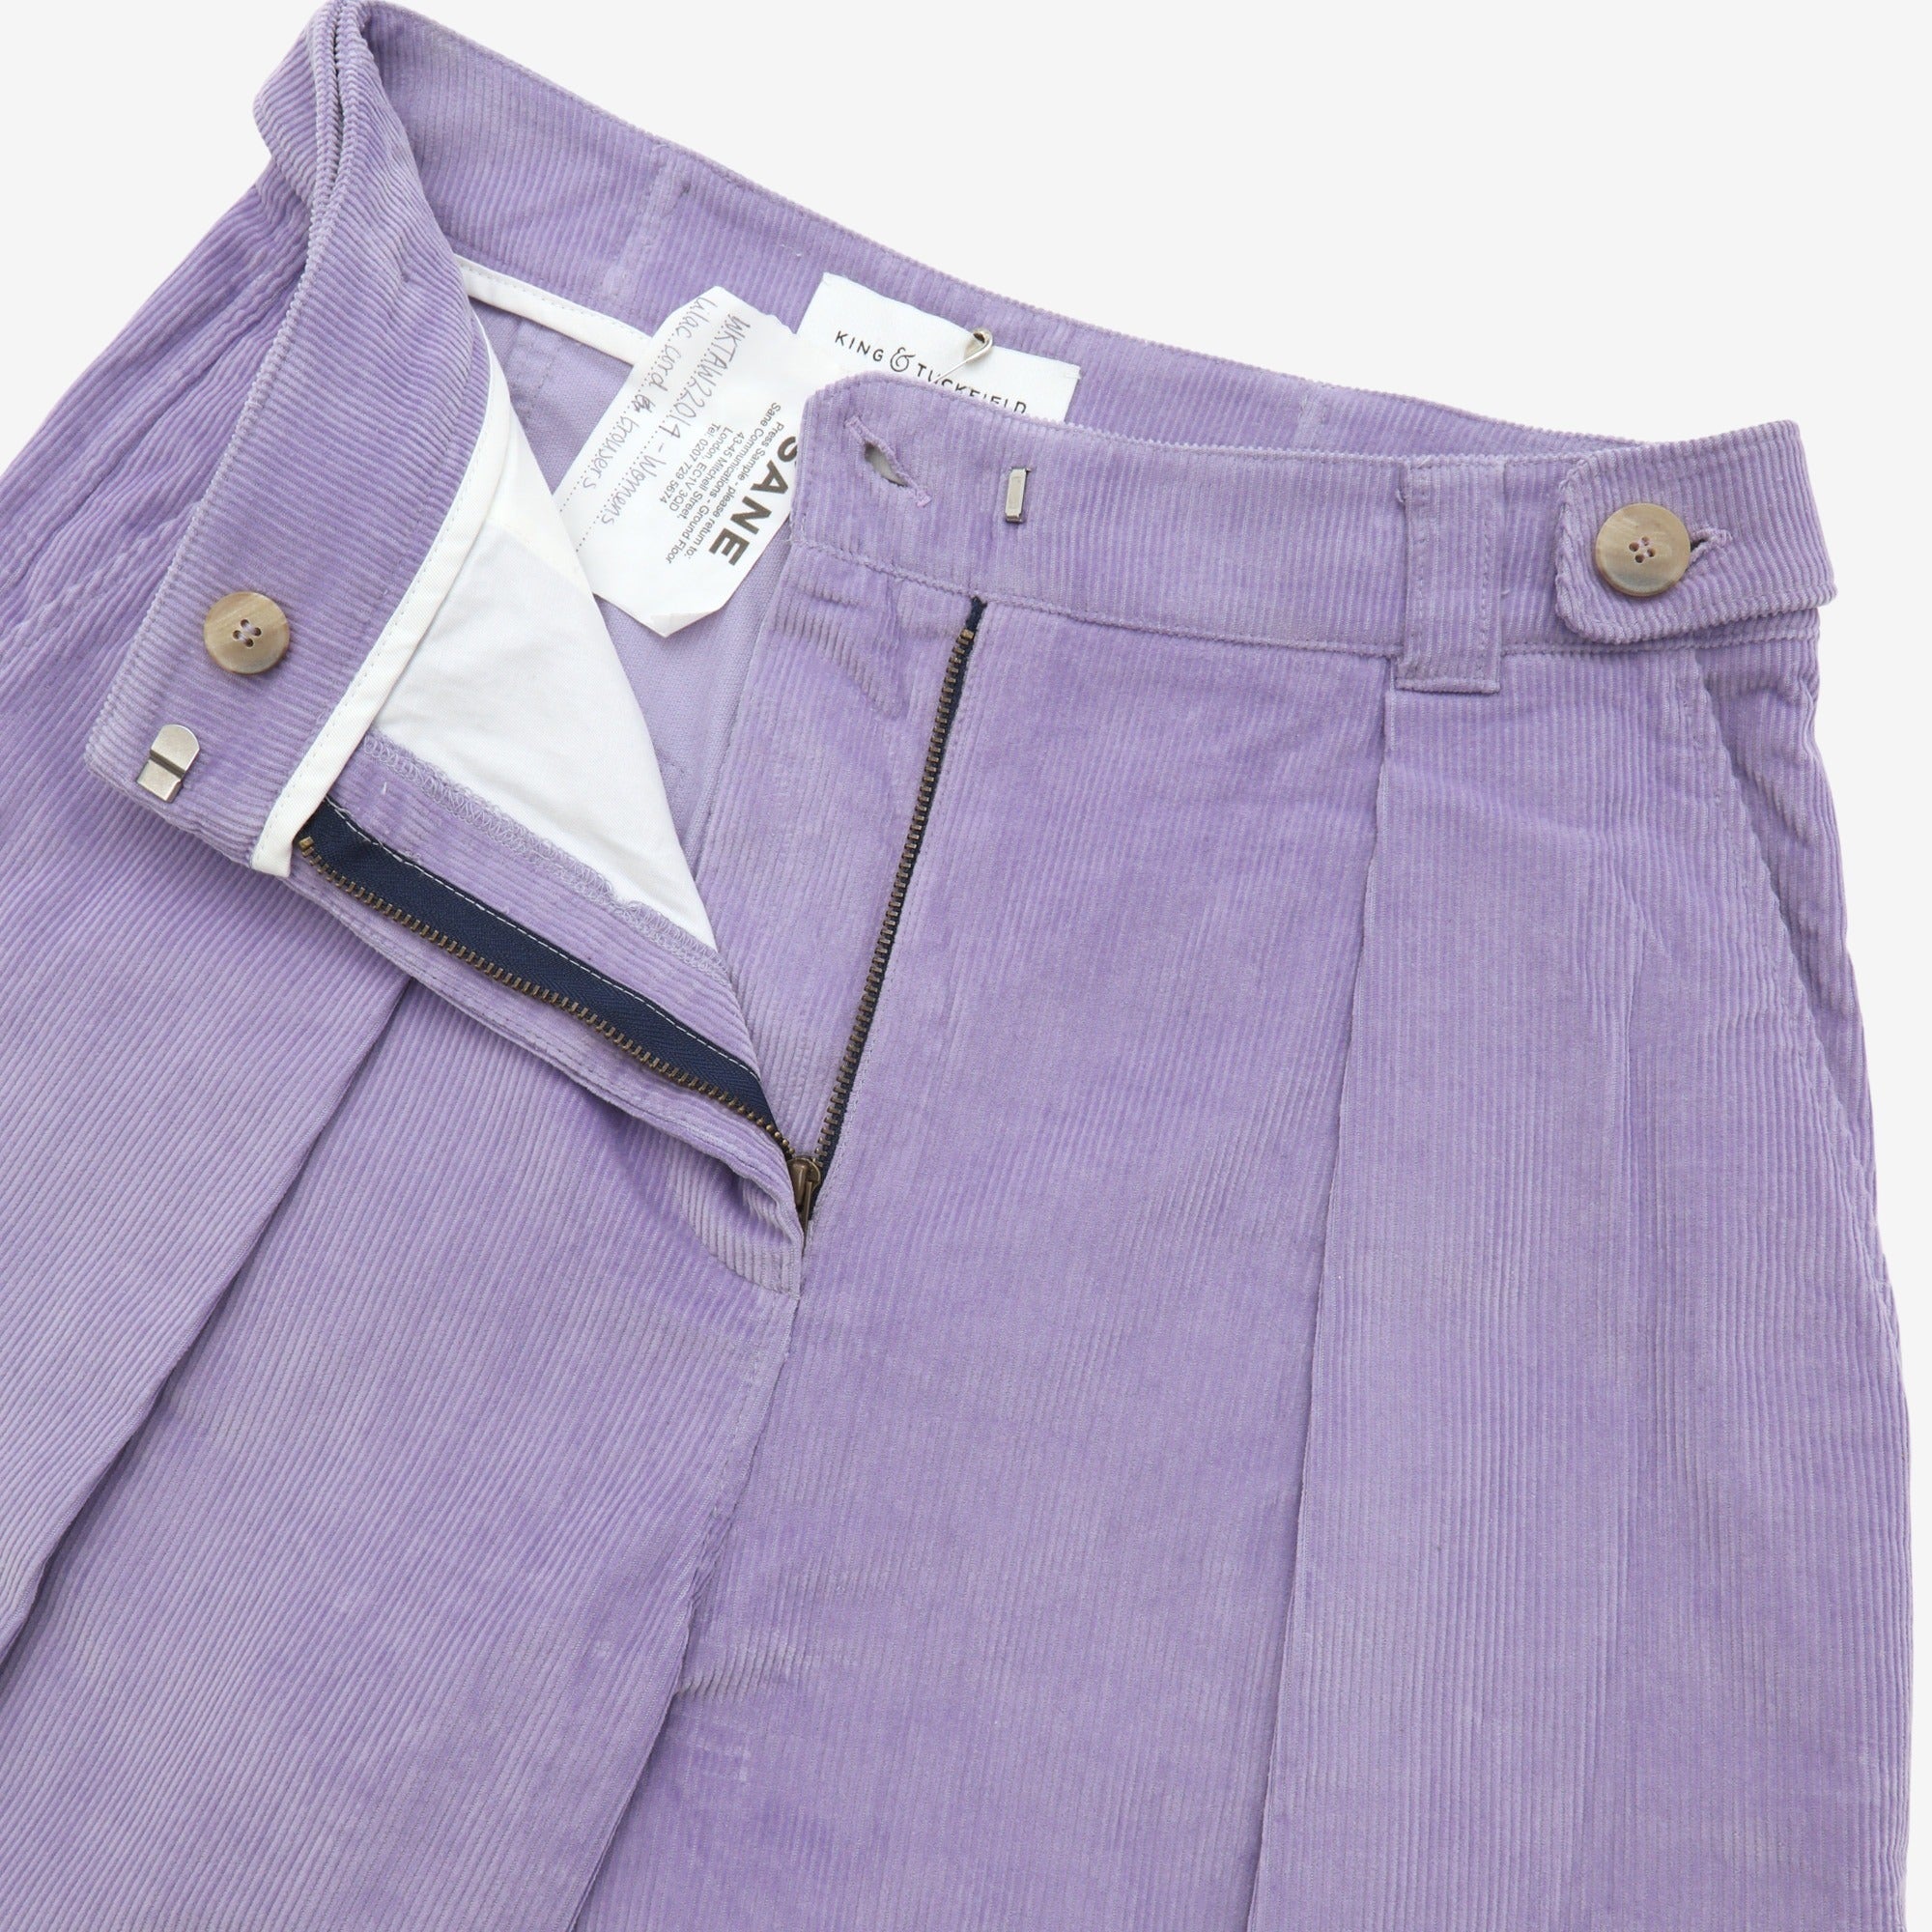 Womens Cord Trousers (Sample)